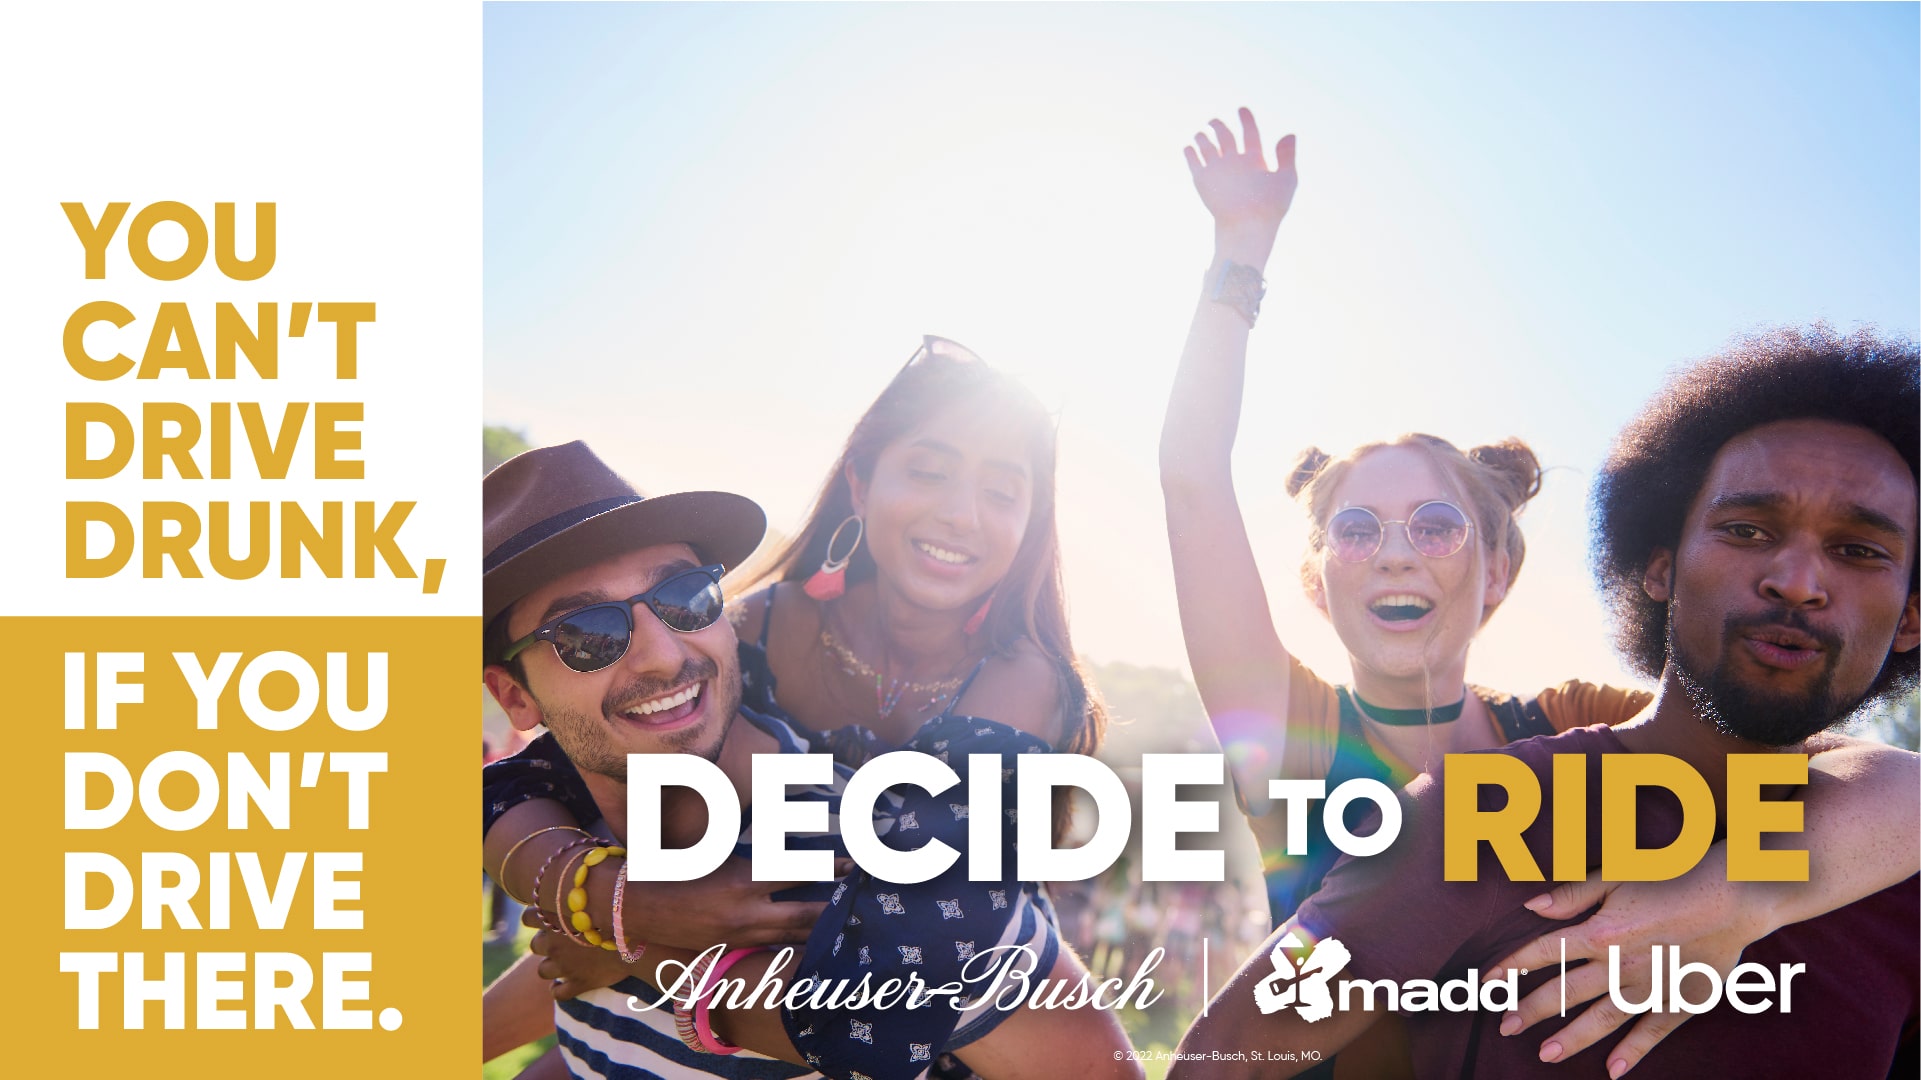 Anheuser-Busch, MADD and Uber Partner with the Colorado Department of Transportation to Help Prevent Drunk Driving this Summer Through the Decide to Ride Campaign